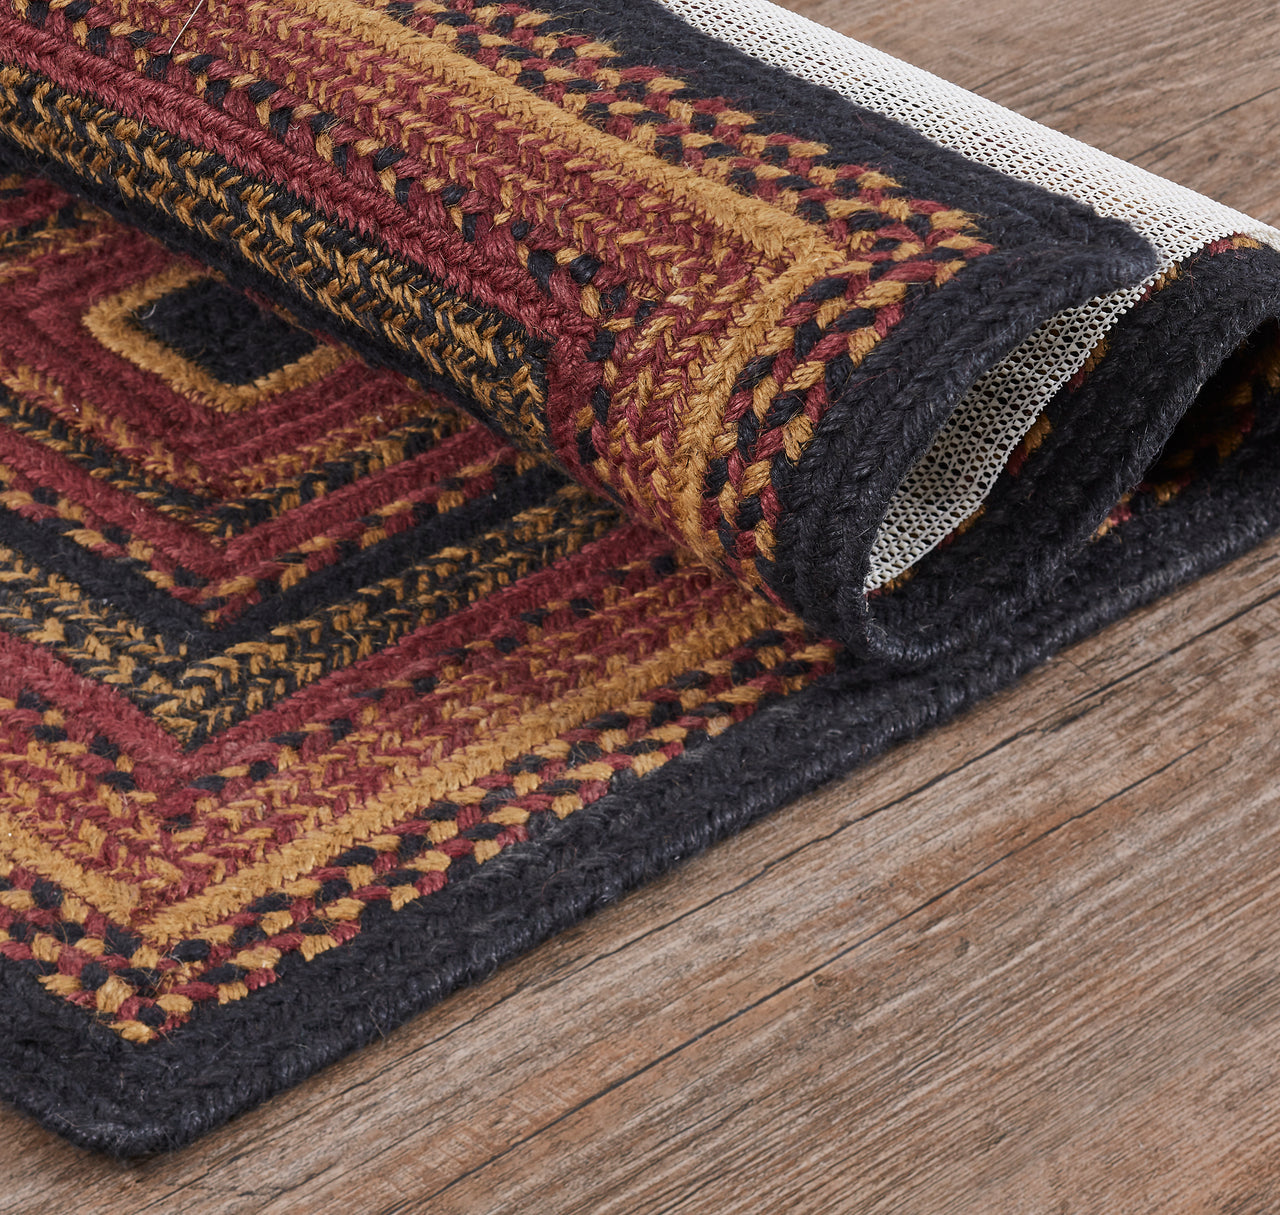 Heritage Farms Jute Braided Rug Rect. with Rug Pad 27"x48" VHC Brands